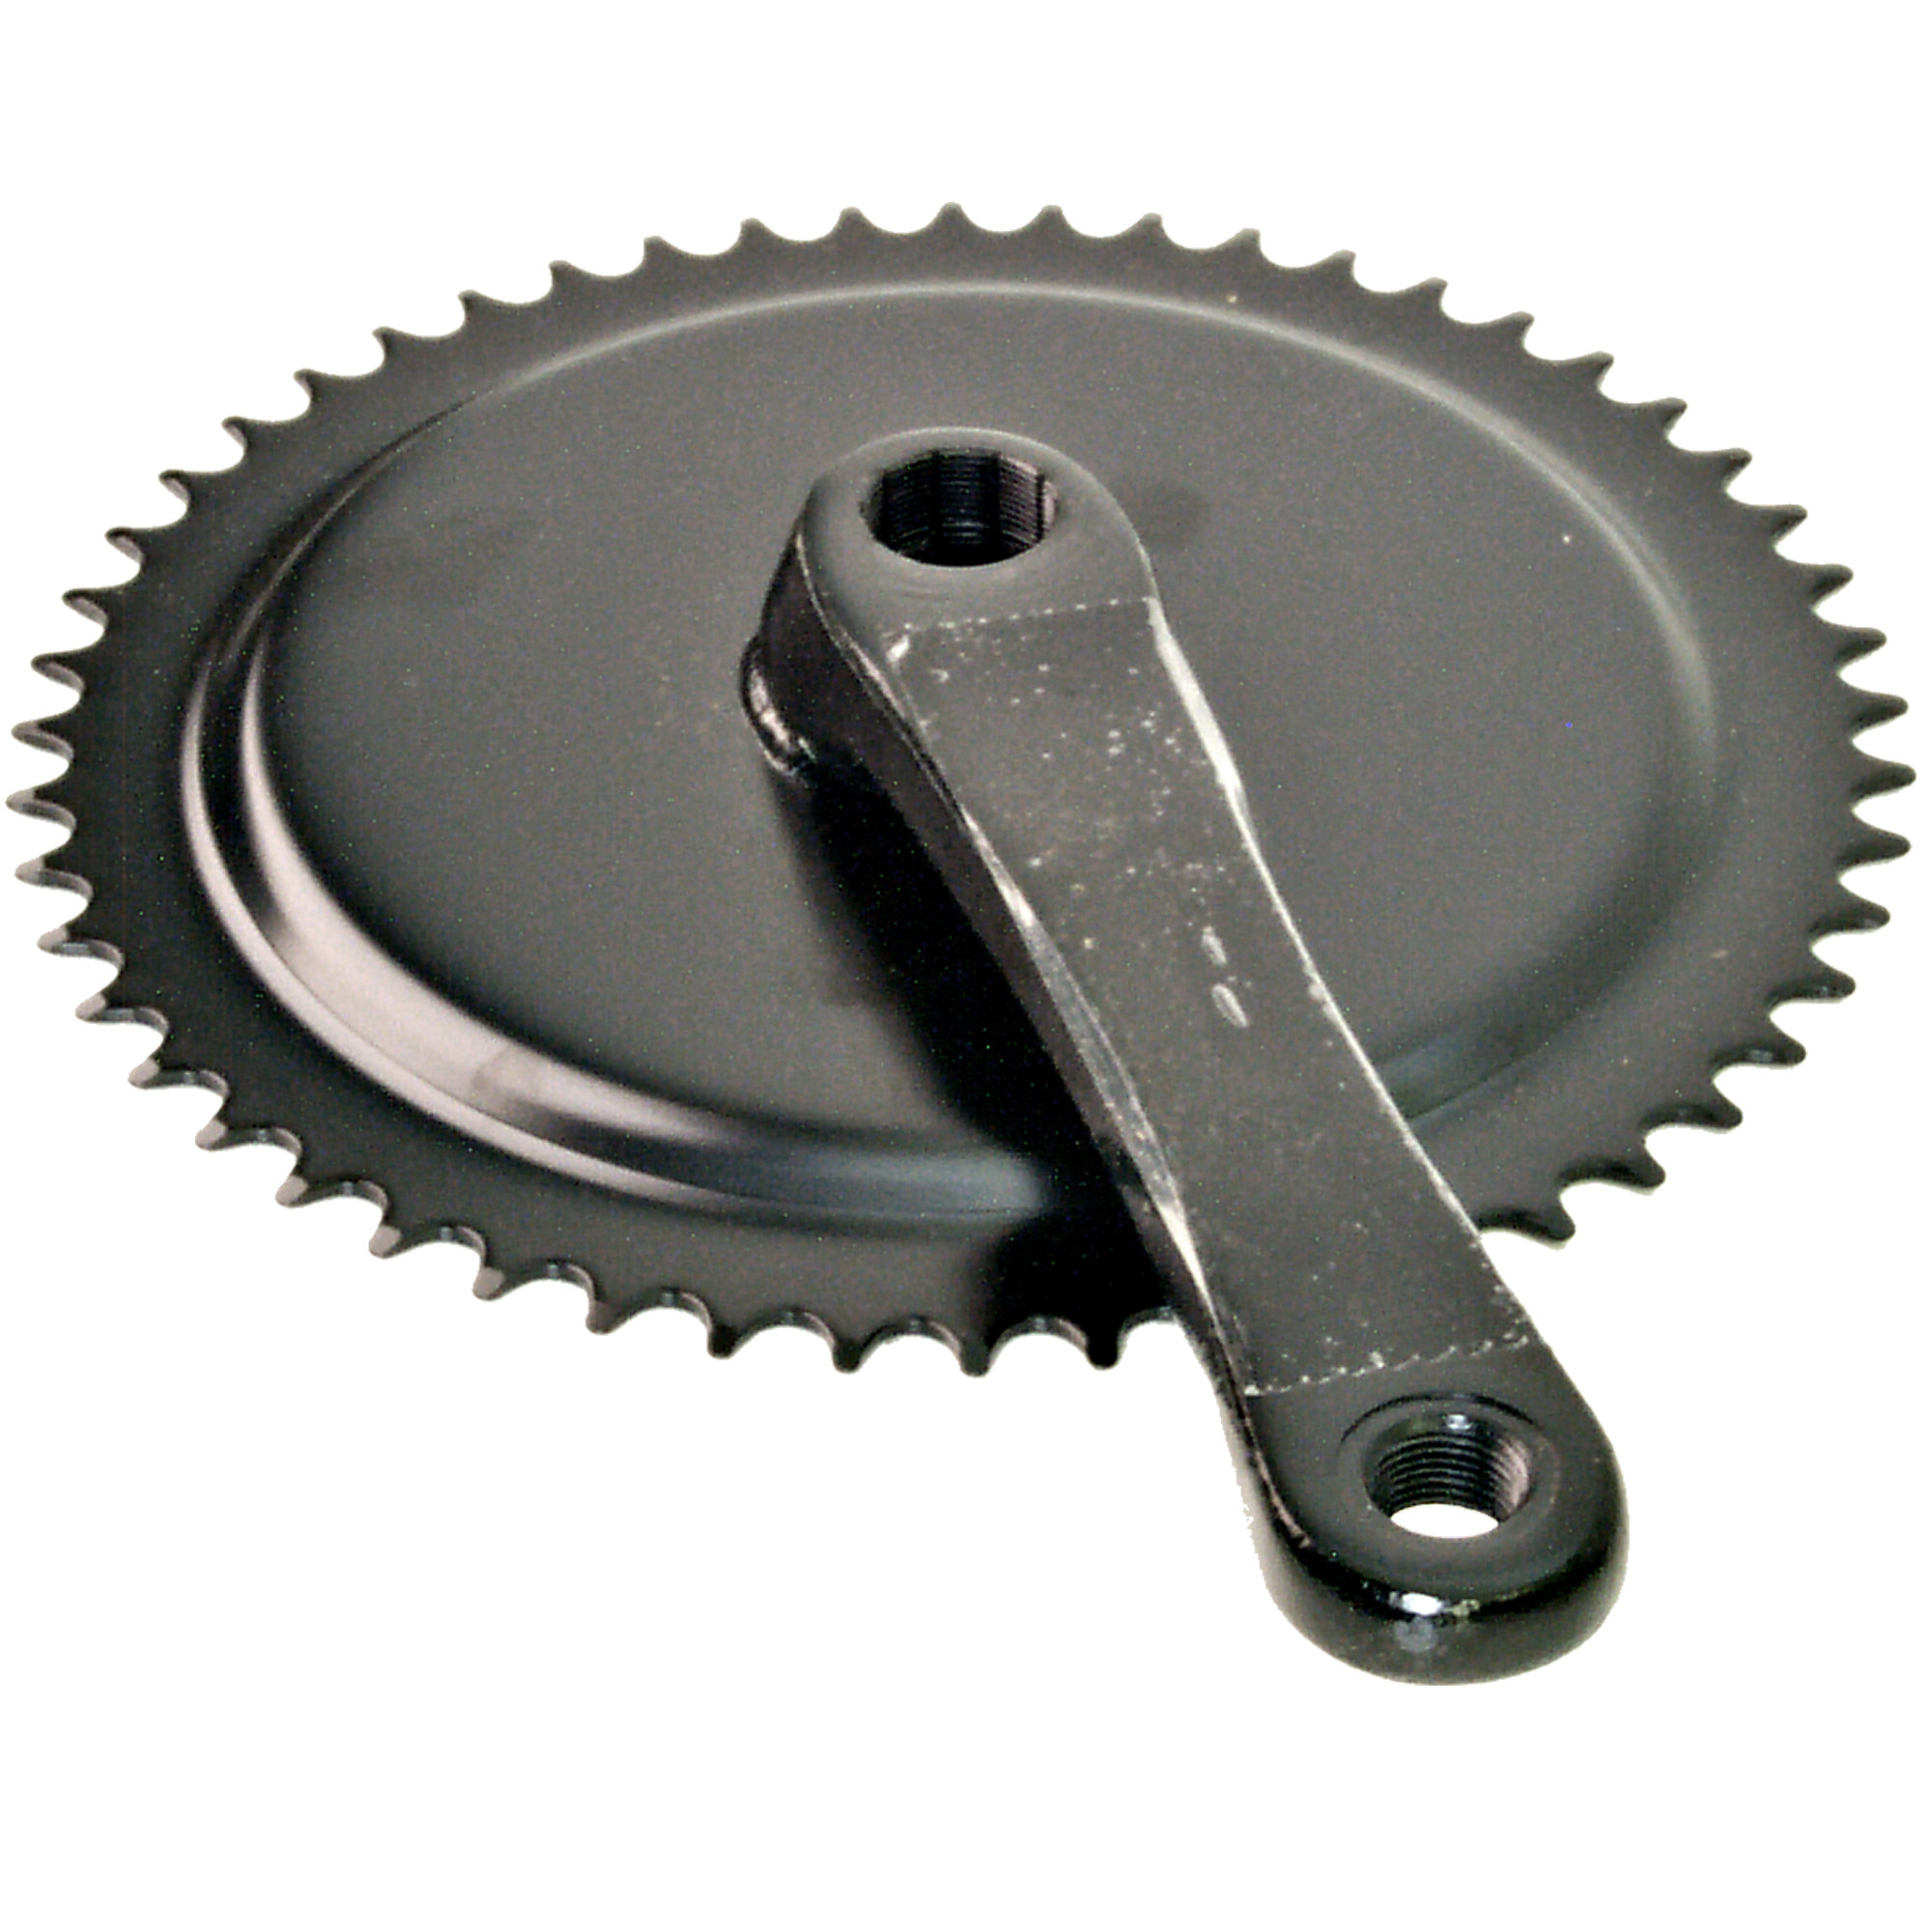 Right Crank Arm with Sprocket, ISIS, 3/32" x 52 Tooth, Schwinn